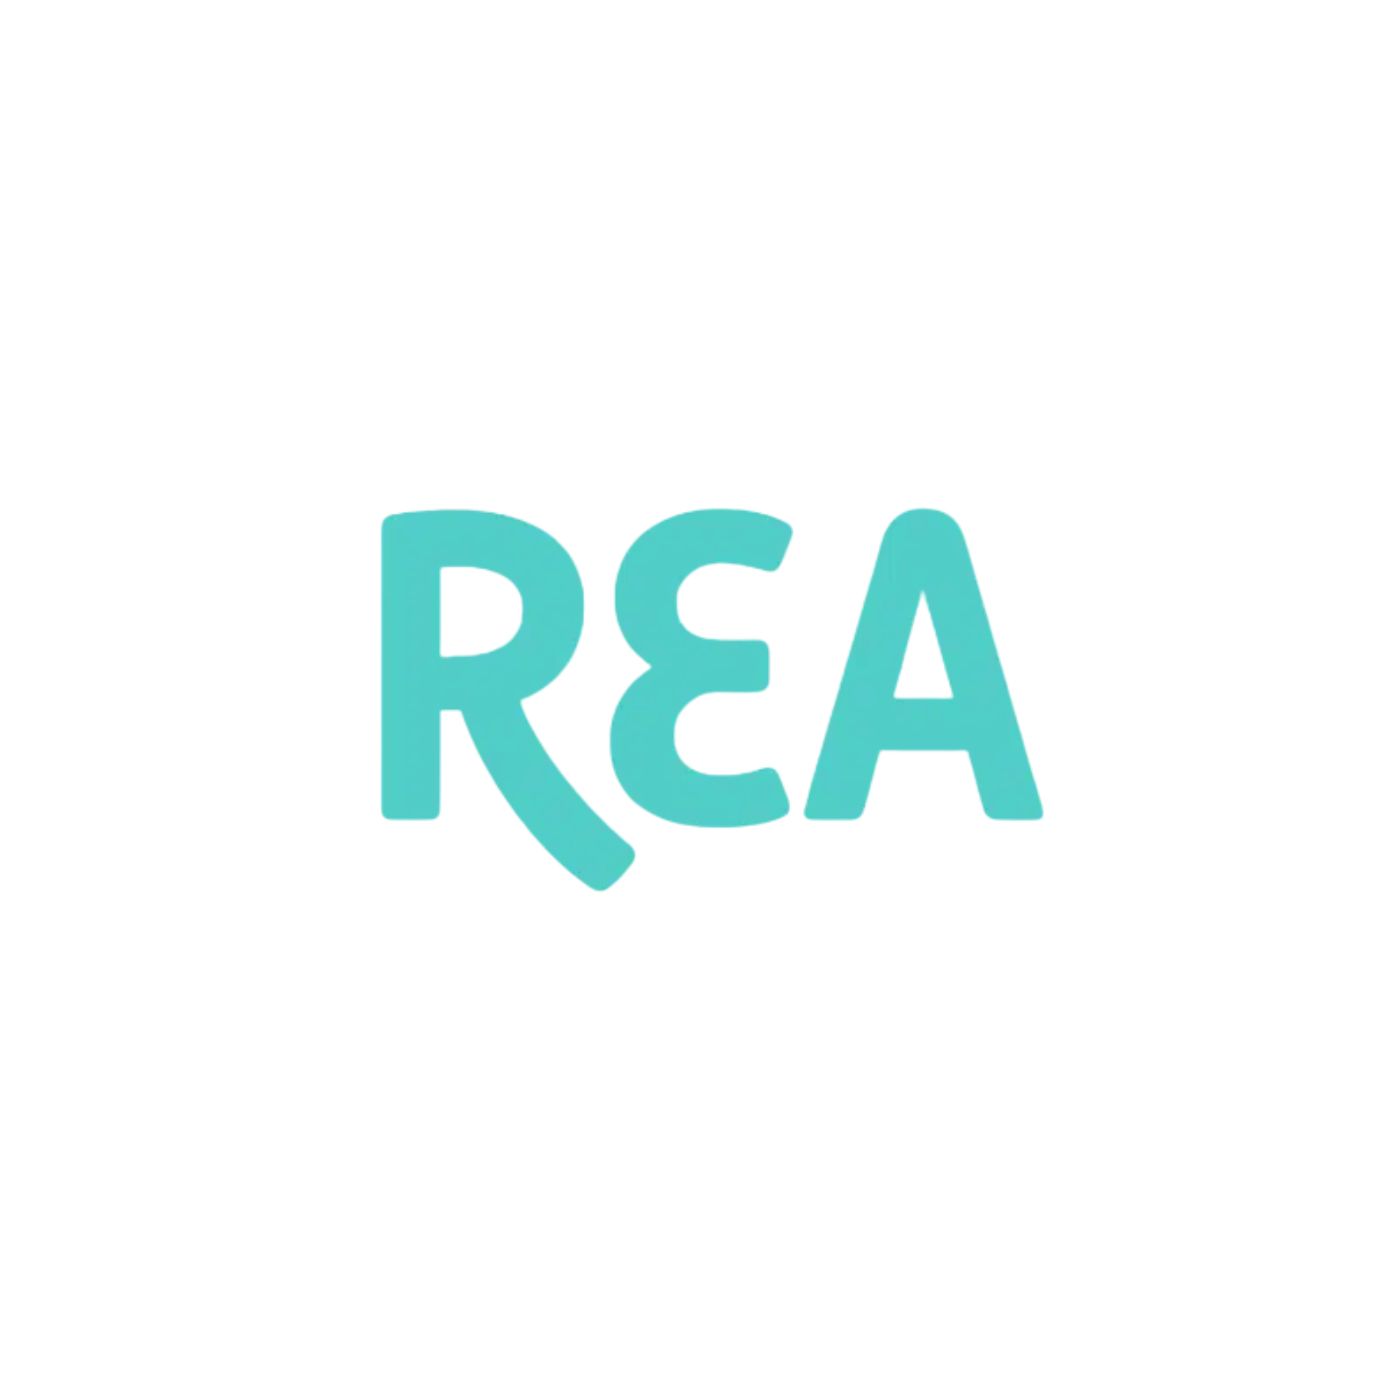 REA - Real Estate Accounting